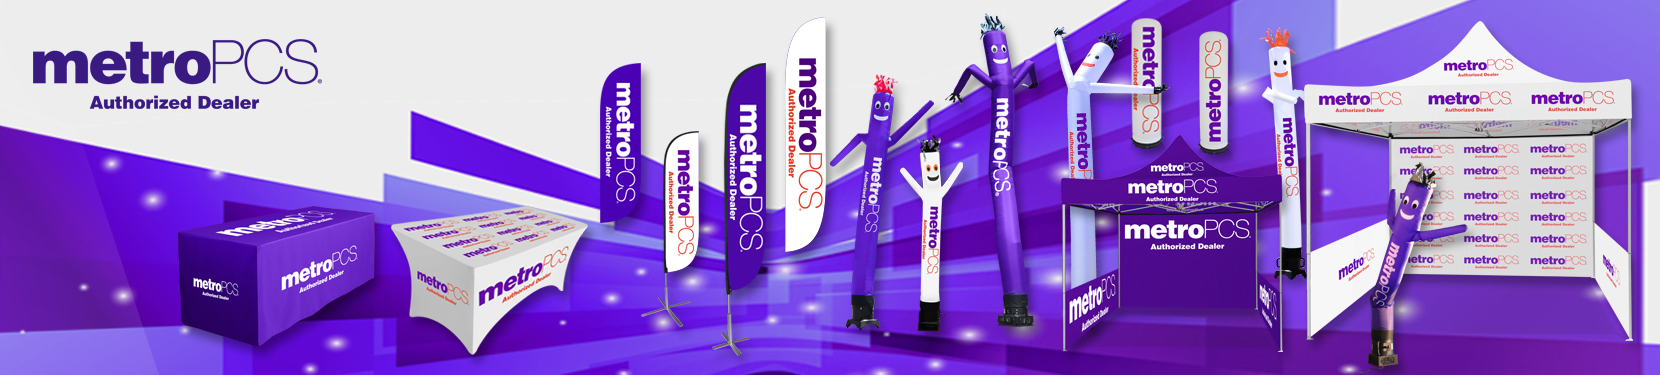 metropcs-feather-flags-banners-air-dancers-and-outdoor-advertising.jpg